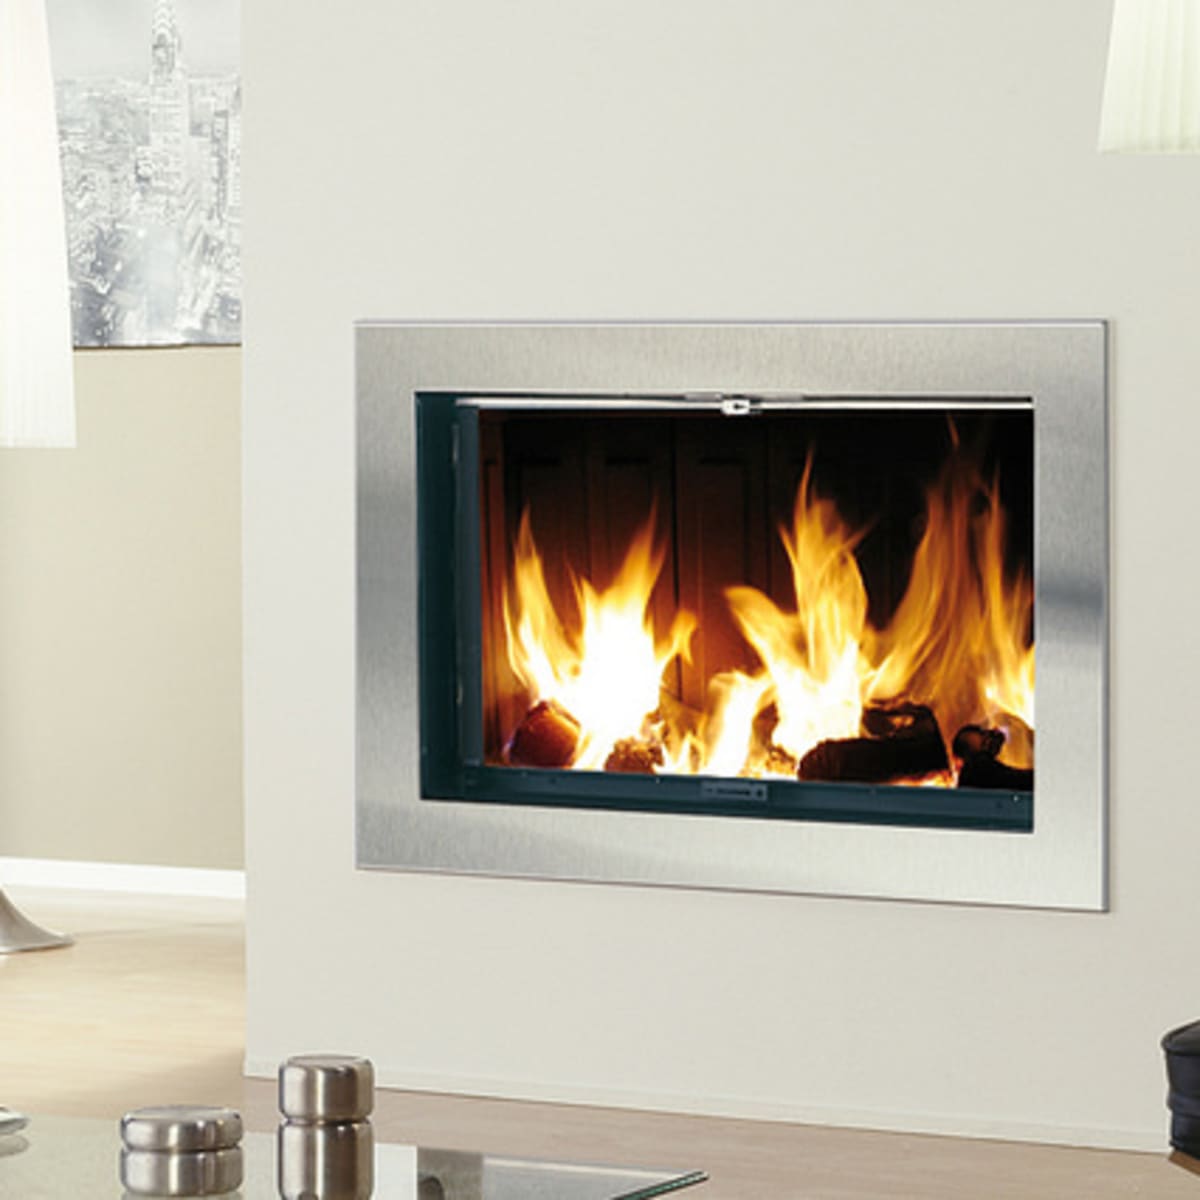 Wall Mounted Electric Fireplace, How To Put Electric Fireplace In Wall